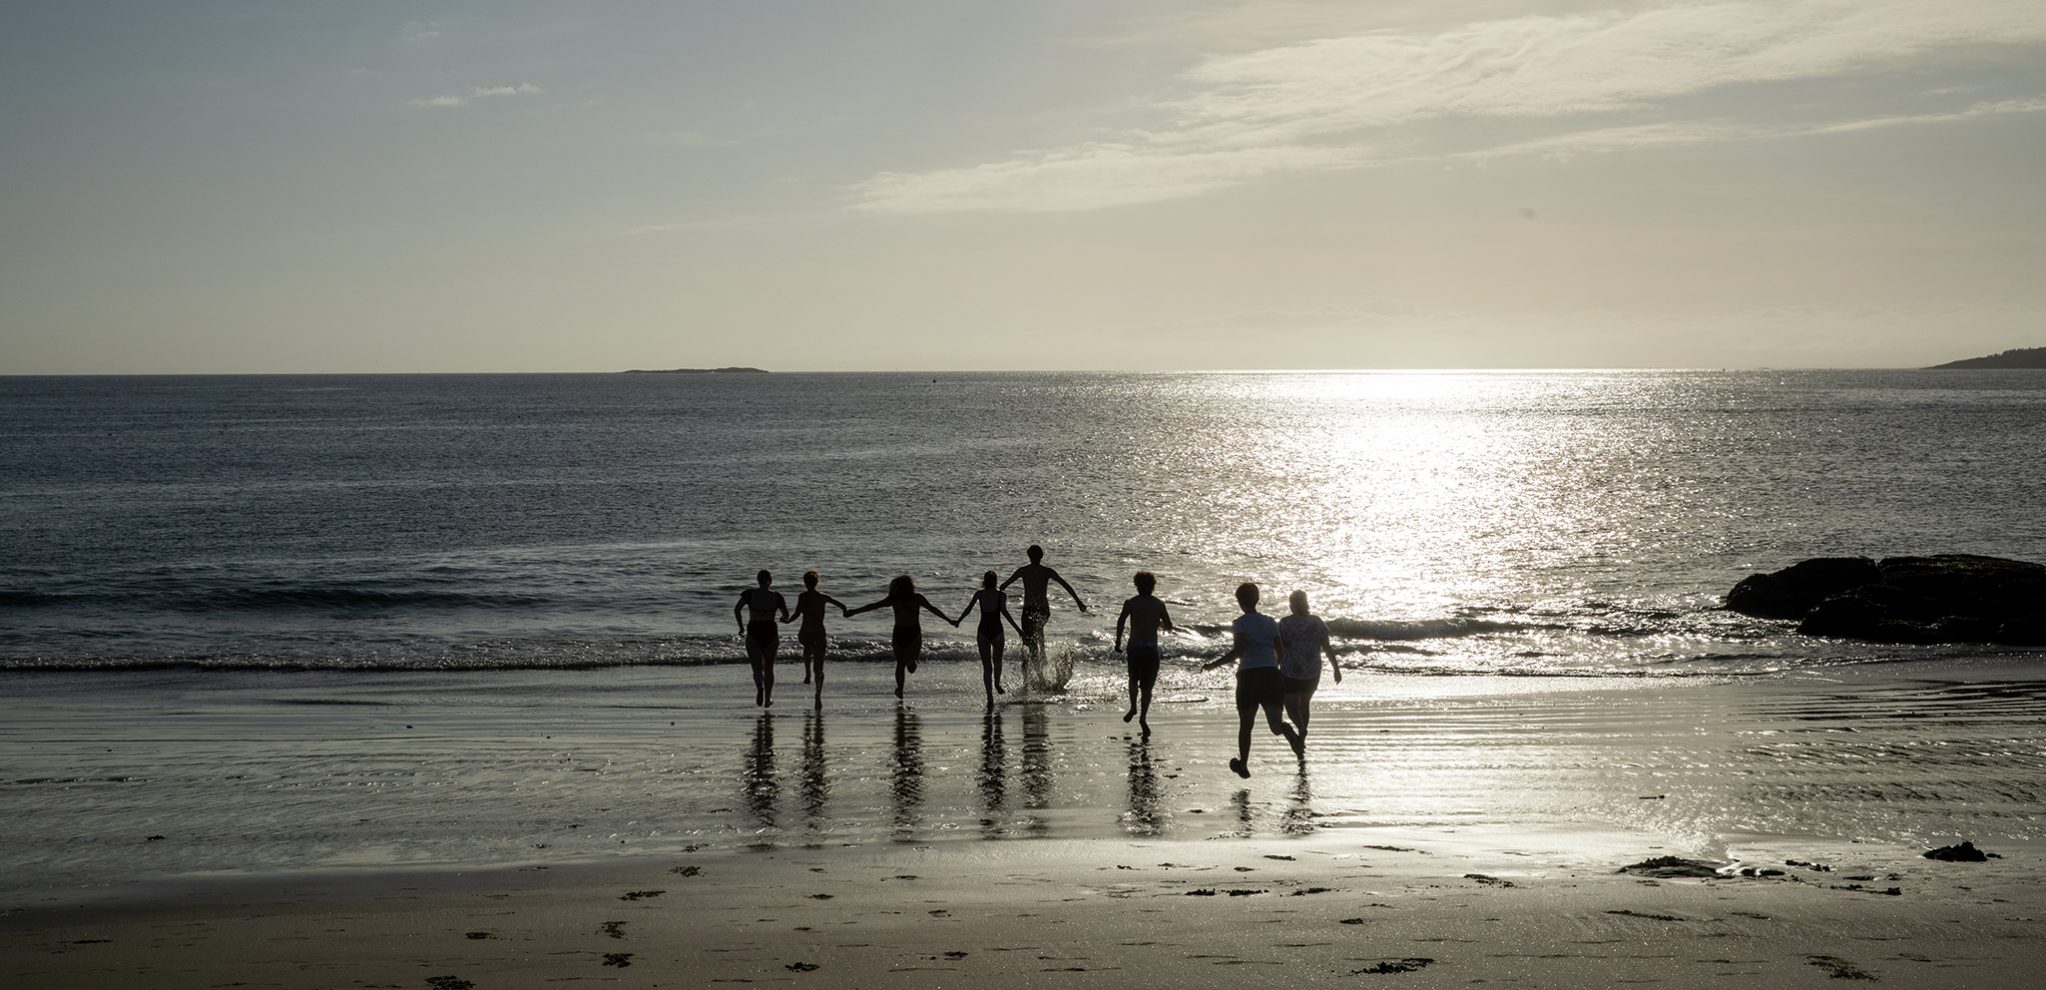 a line of high school students silhouetted at the ocean; they are running toward the water together at sunset; the beach and water are both silvery in color